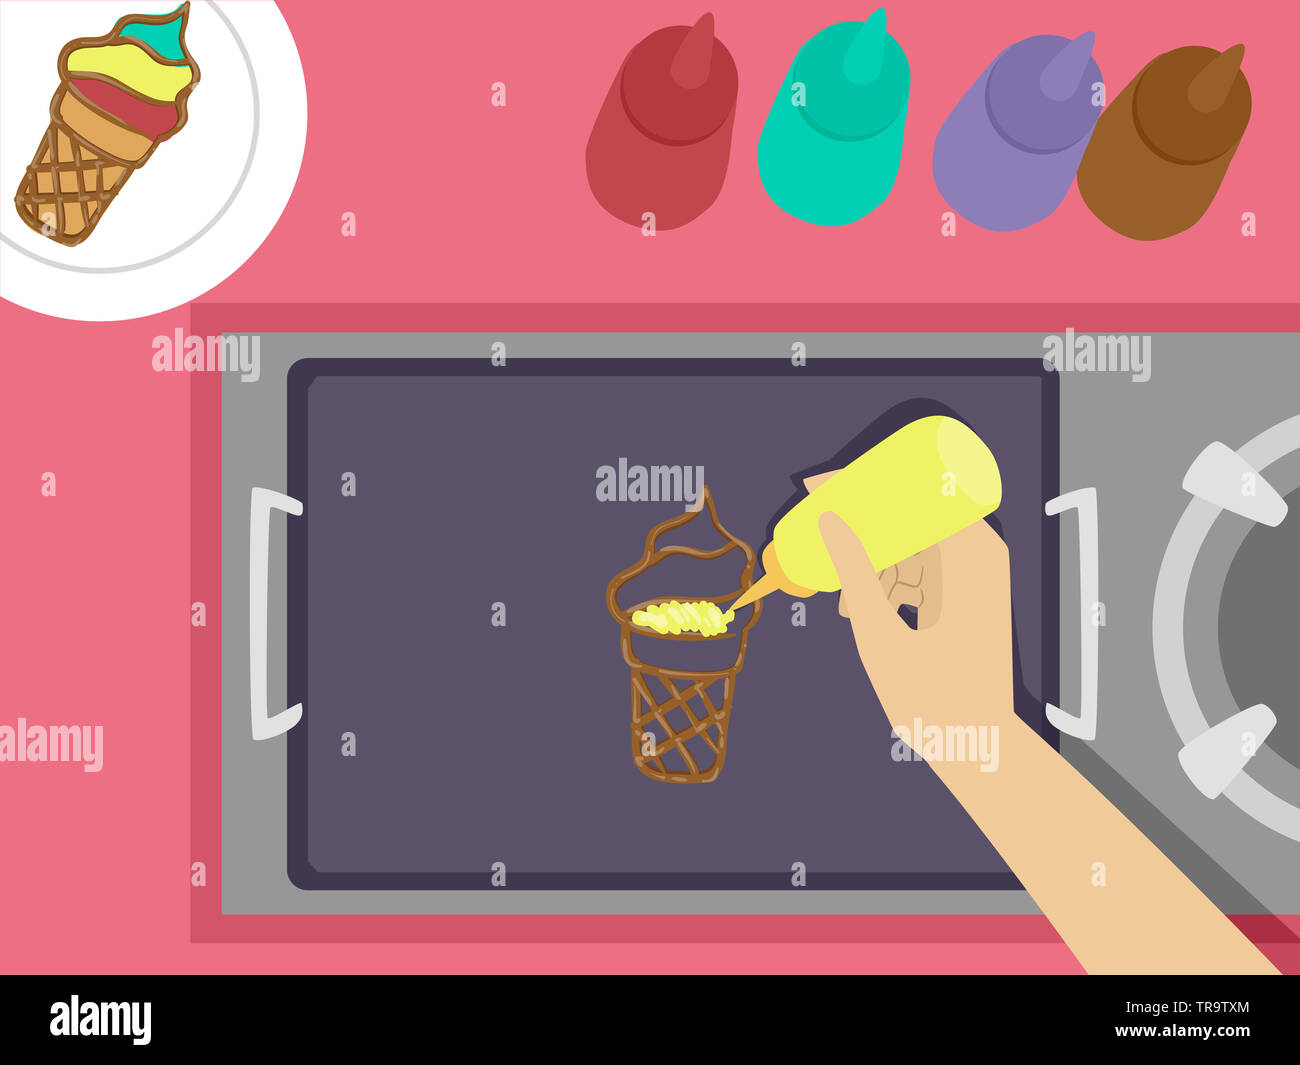 Illustration of a Hand Holding a Squeeze Bottle with Batter Making an Ice Cream Pancake Art Stock Photo